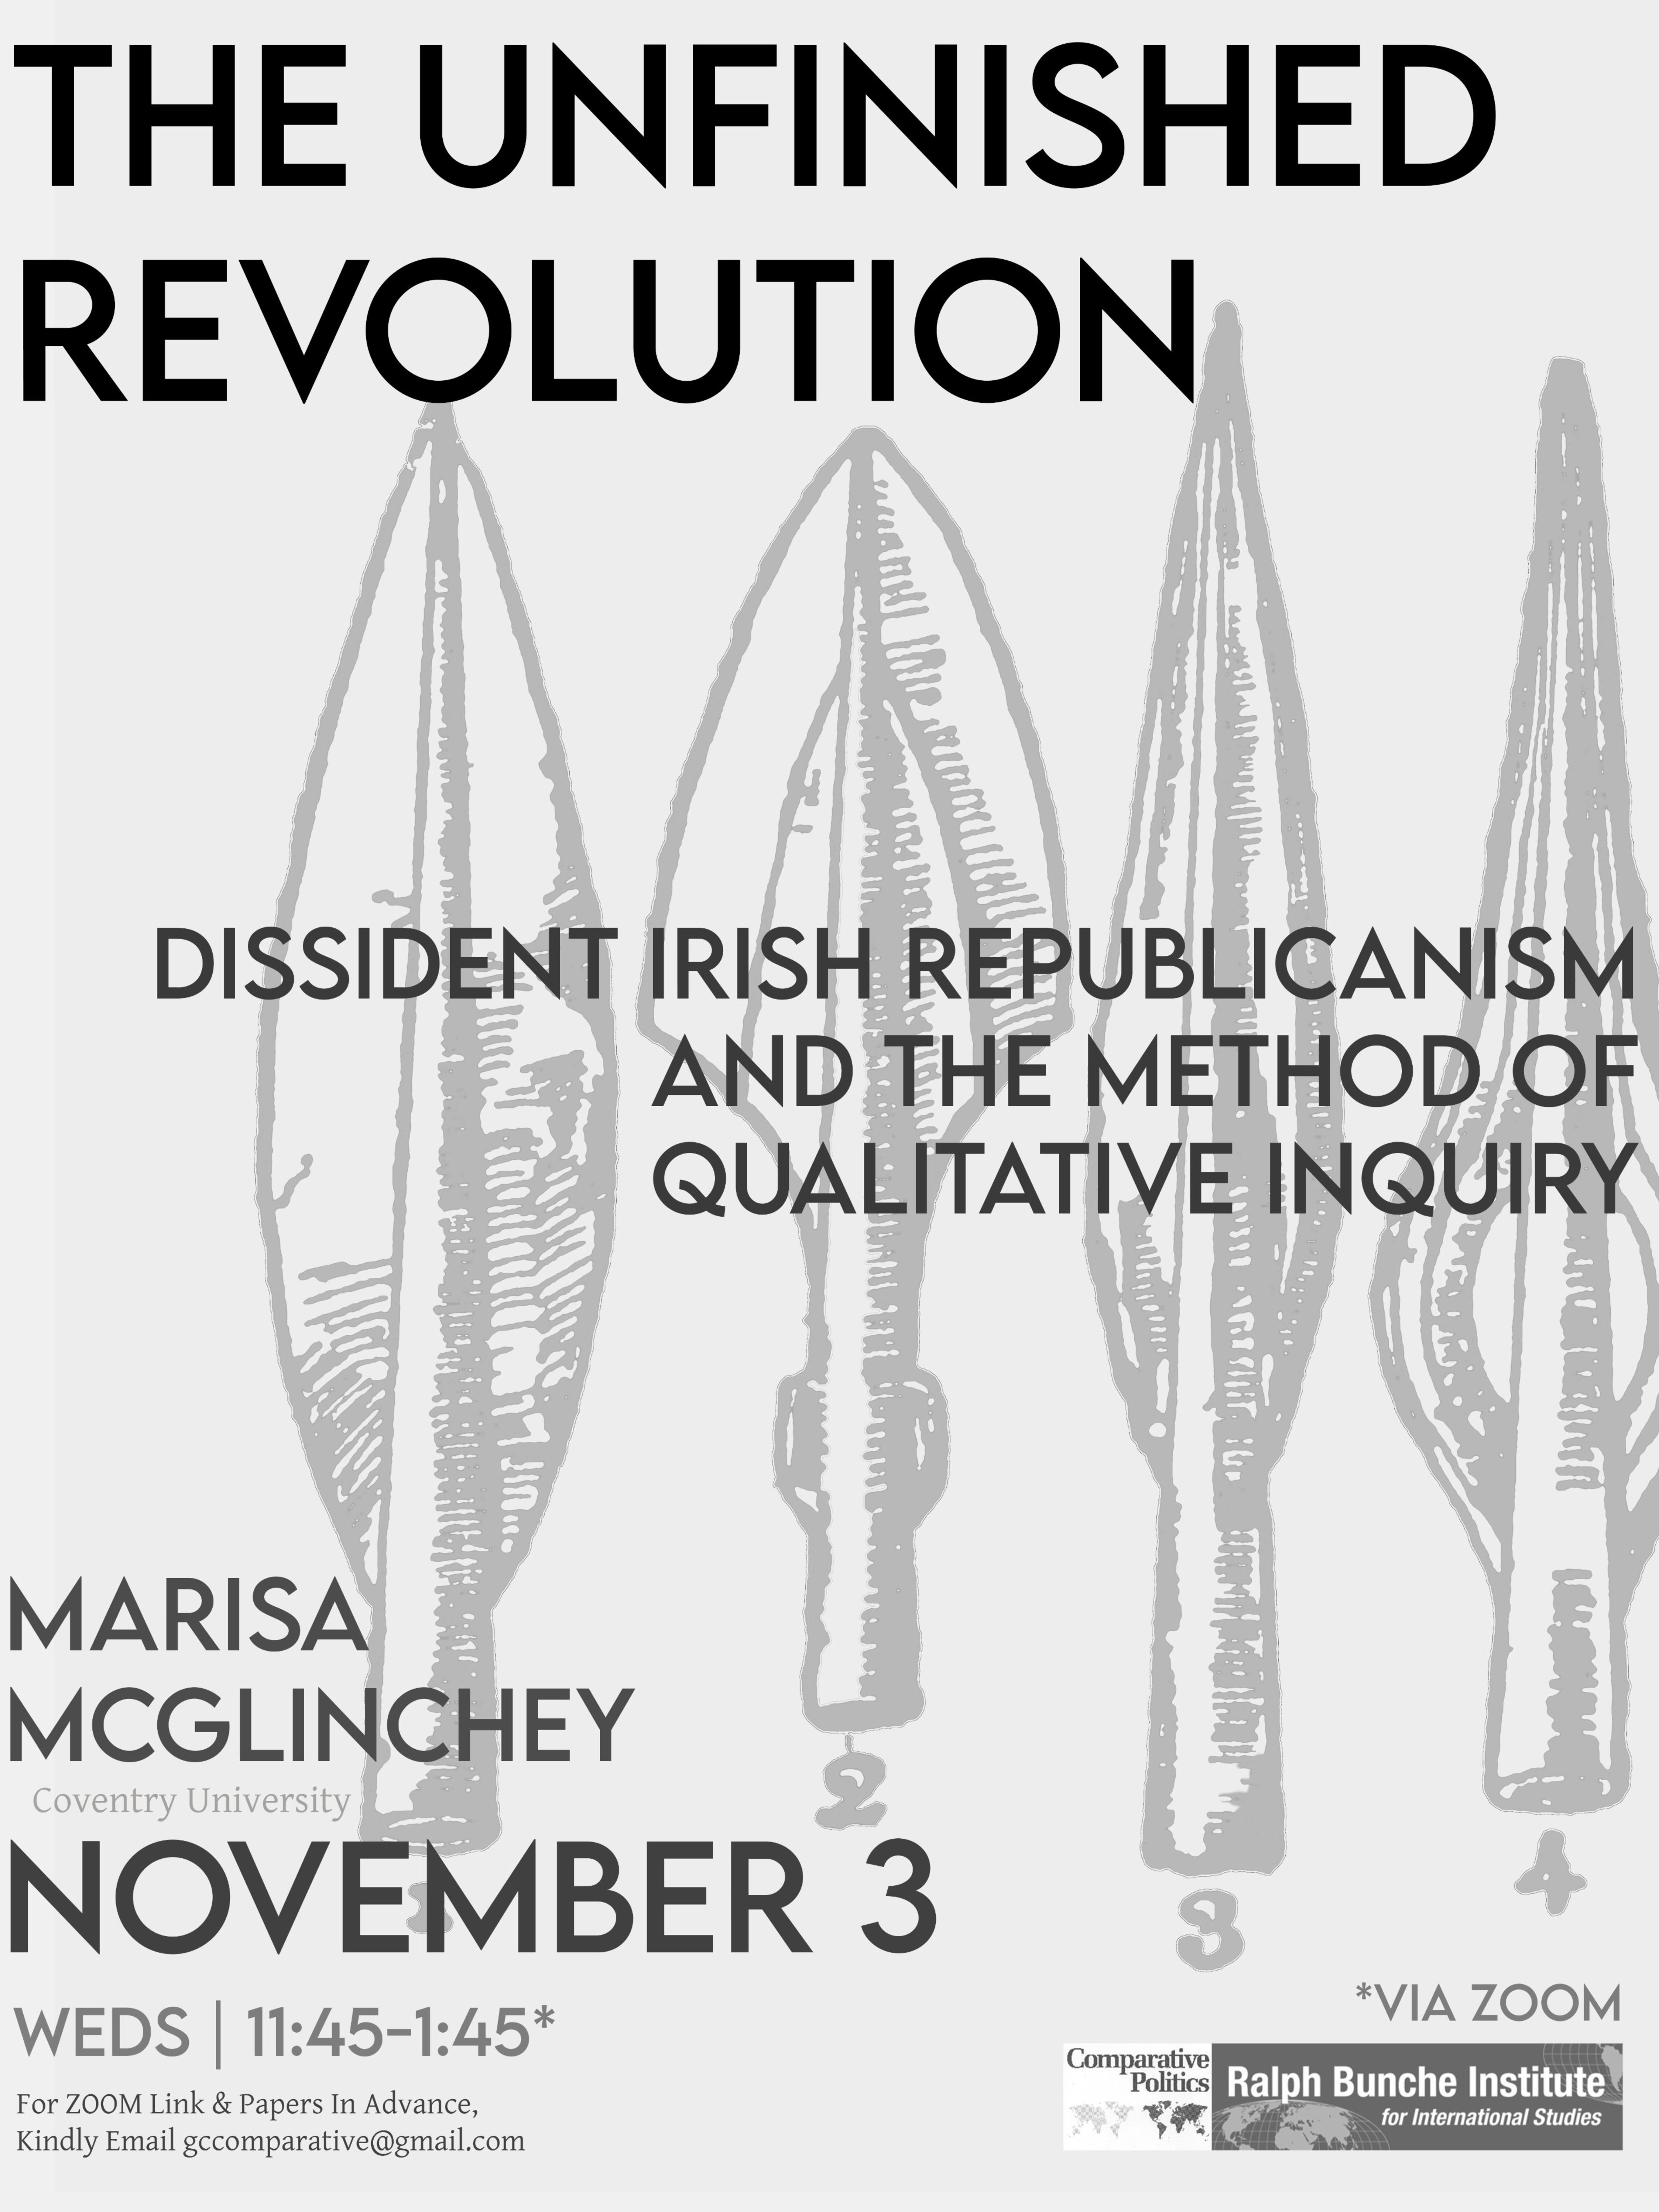 Comparative Politics Workshop: Marisa McGlinchey, "“The Unfinished Revolution: Dissident Irish Republicanism and the Method of Qualitative Inquiry," Wednesday, November 3, 11:45am–1:45pm